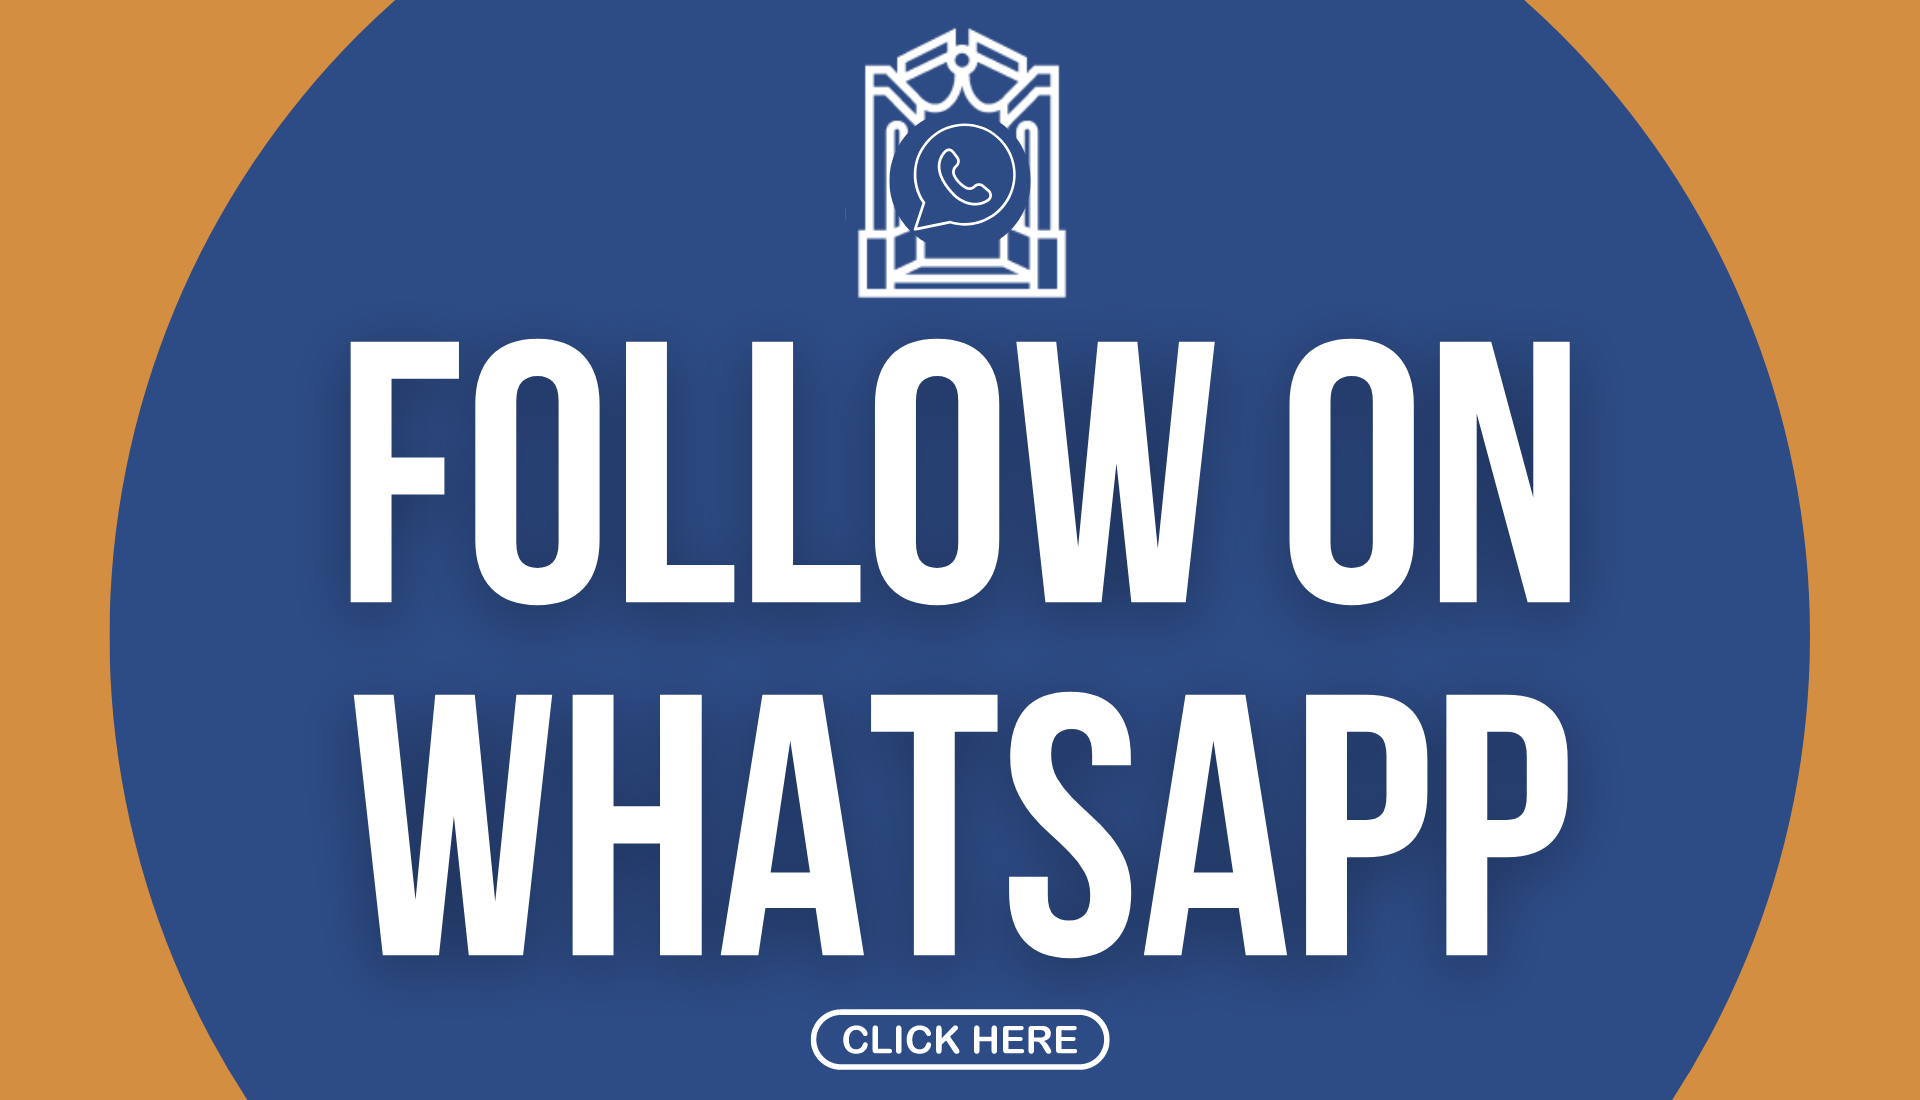 Click Here to Follow on WhatsApp